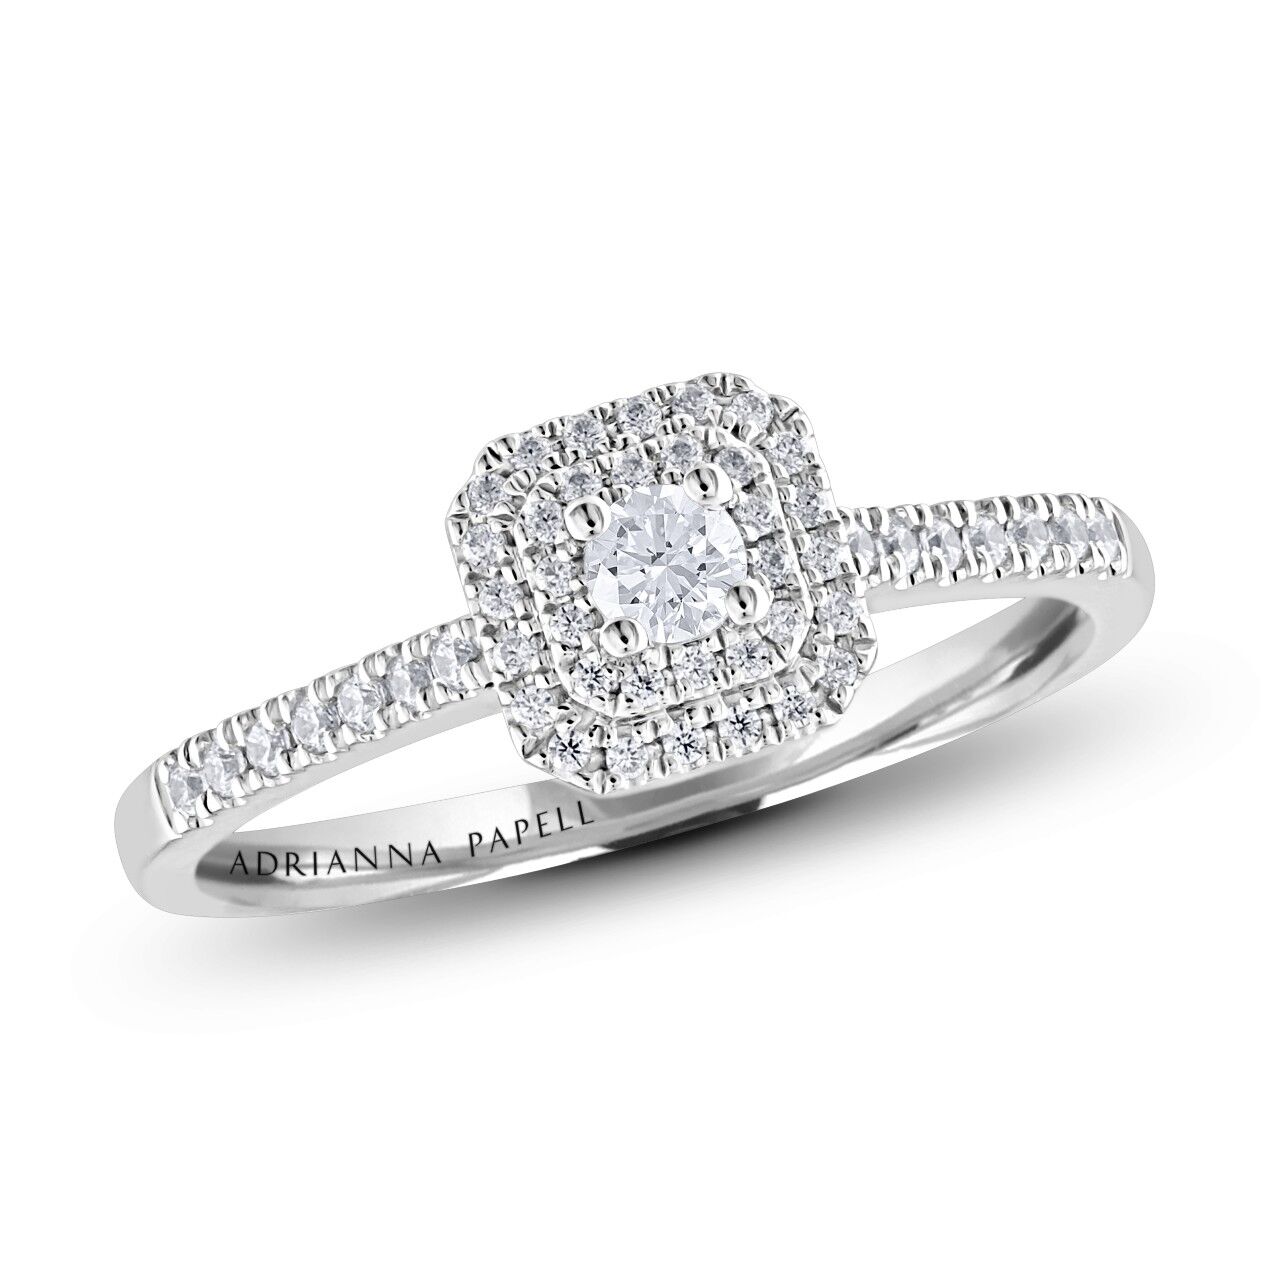 adrianna-papell-engagement-ring